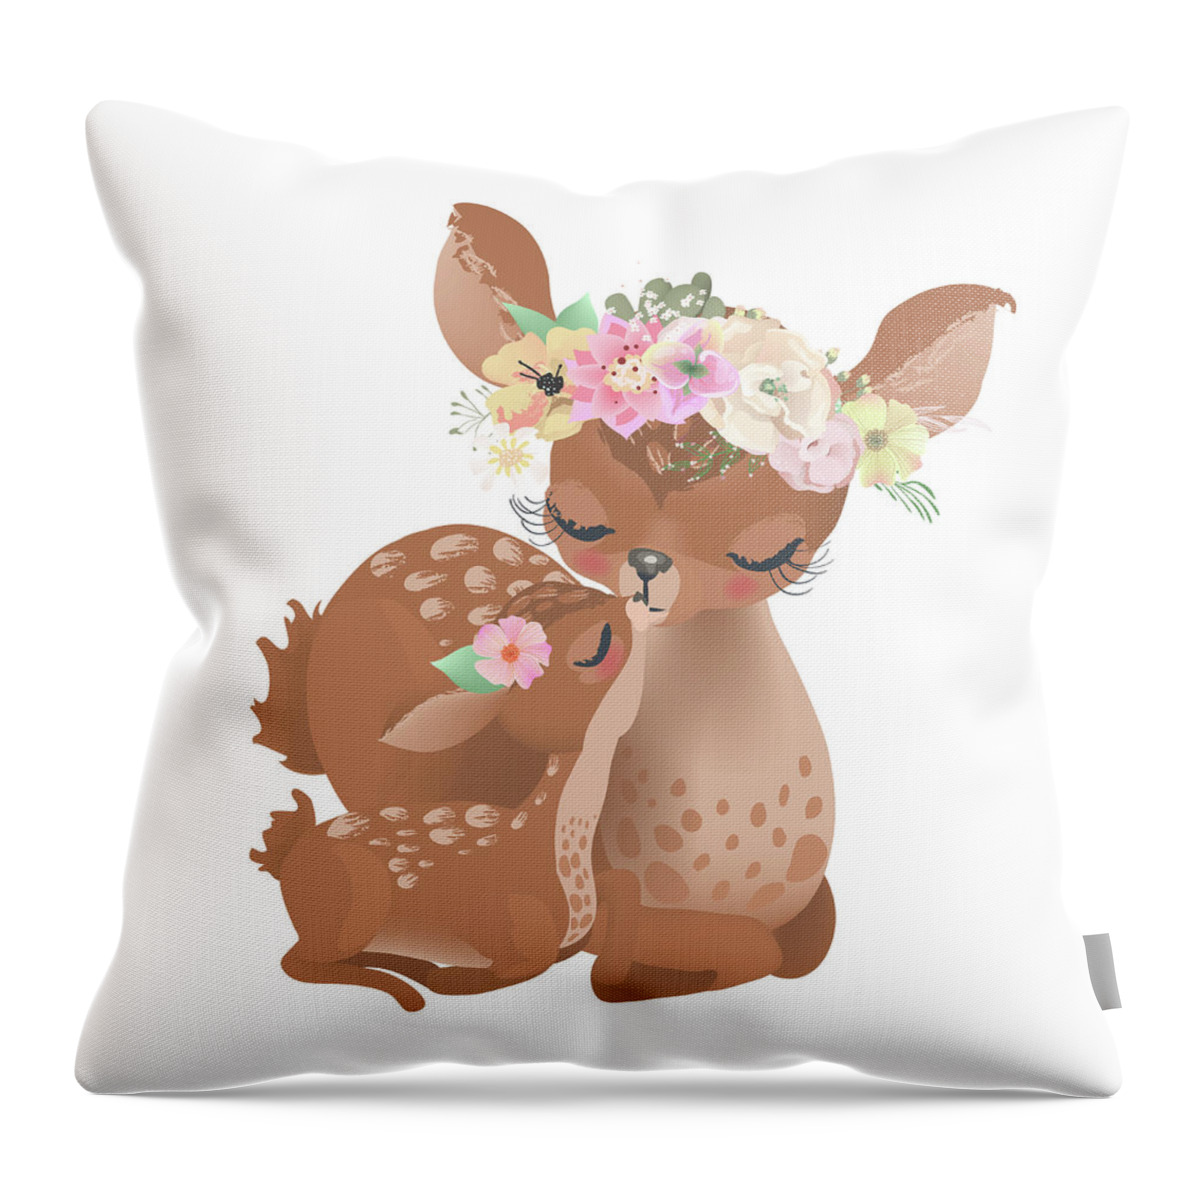 Deer Throw Pillow featuring the digital art Deer Woodland Boho Baby Nursery Floral Throw Pillow by Pink Forest Cafe